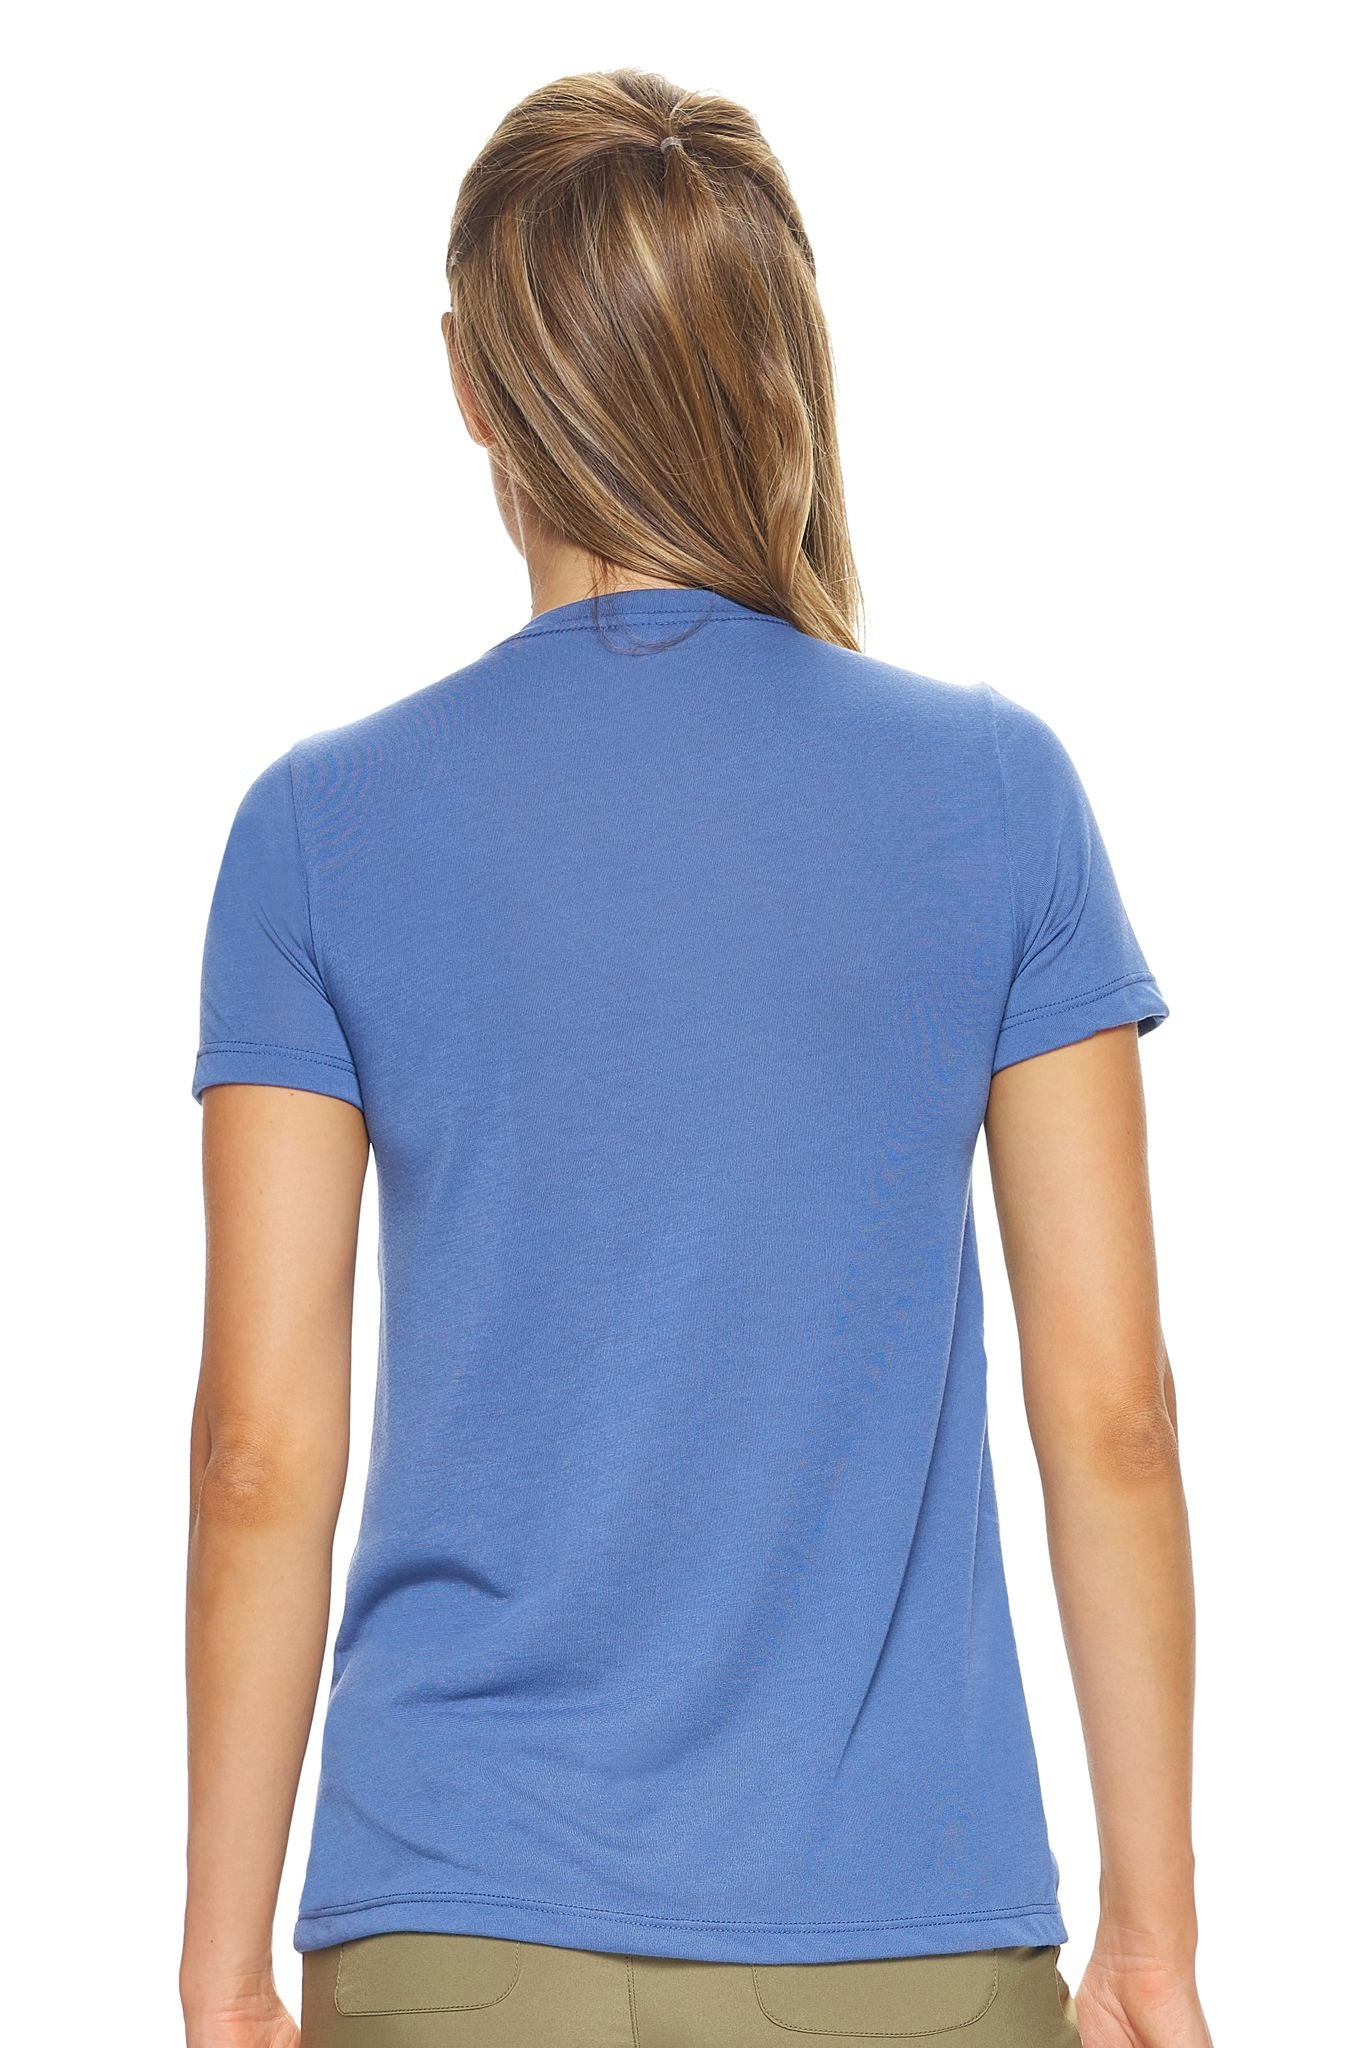 Expert Brand Retail Soft Eco-Friendly Women's Sportswear Women's Scoop Neck Shirt Made in USA stone blue 3#color_stone-blue